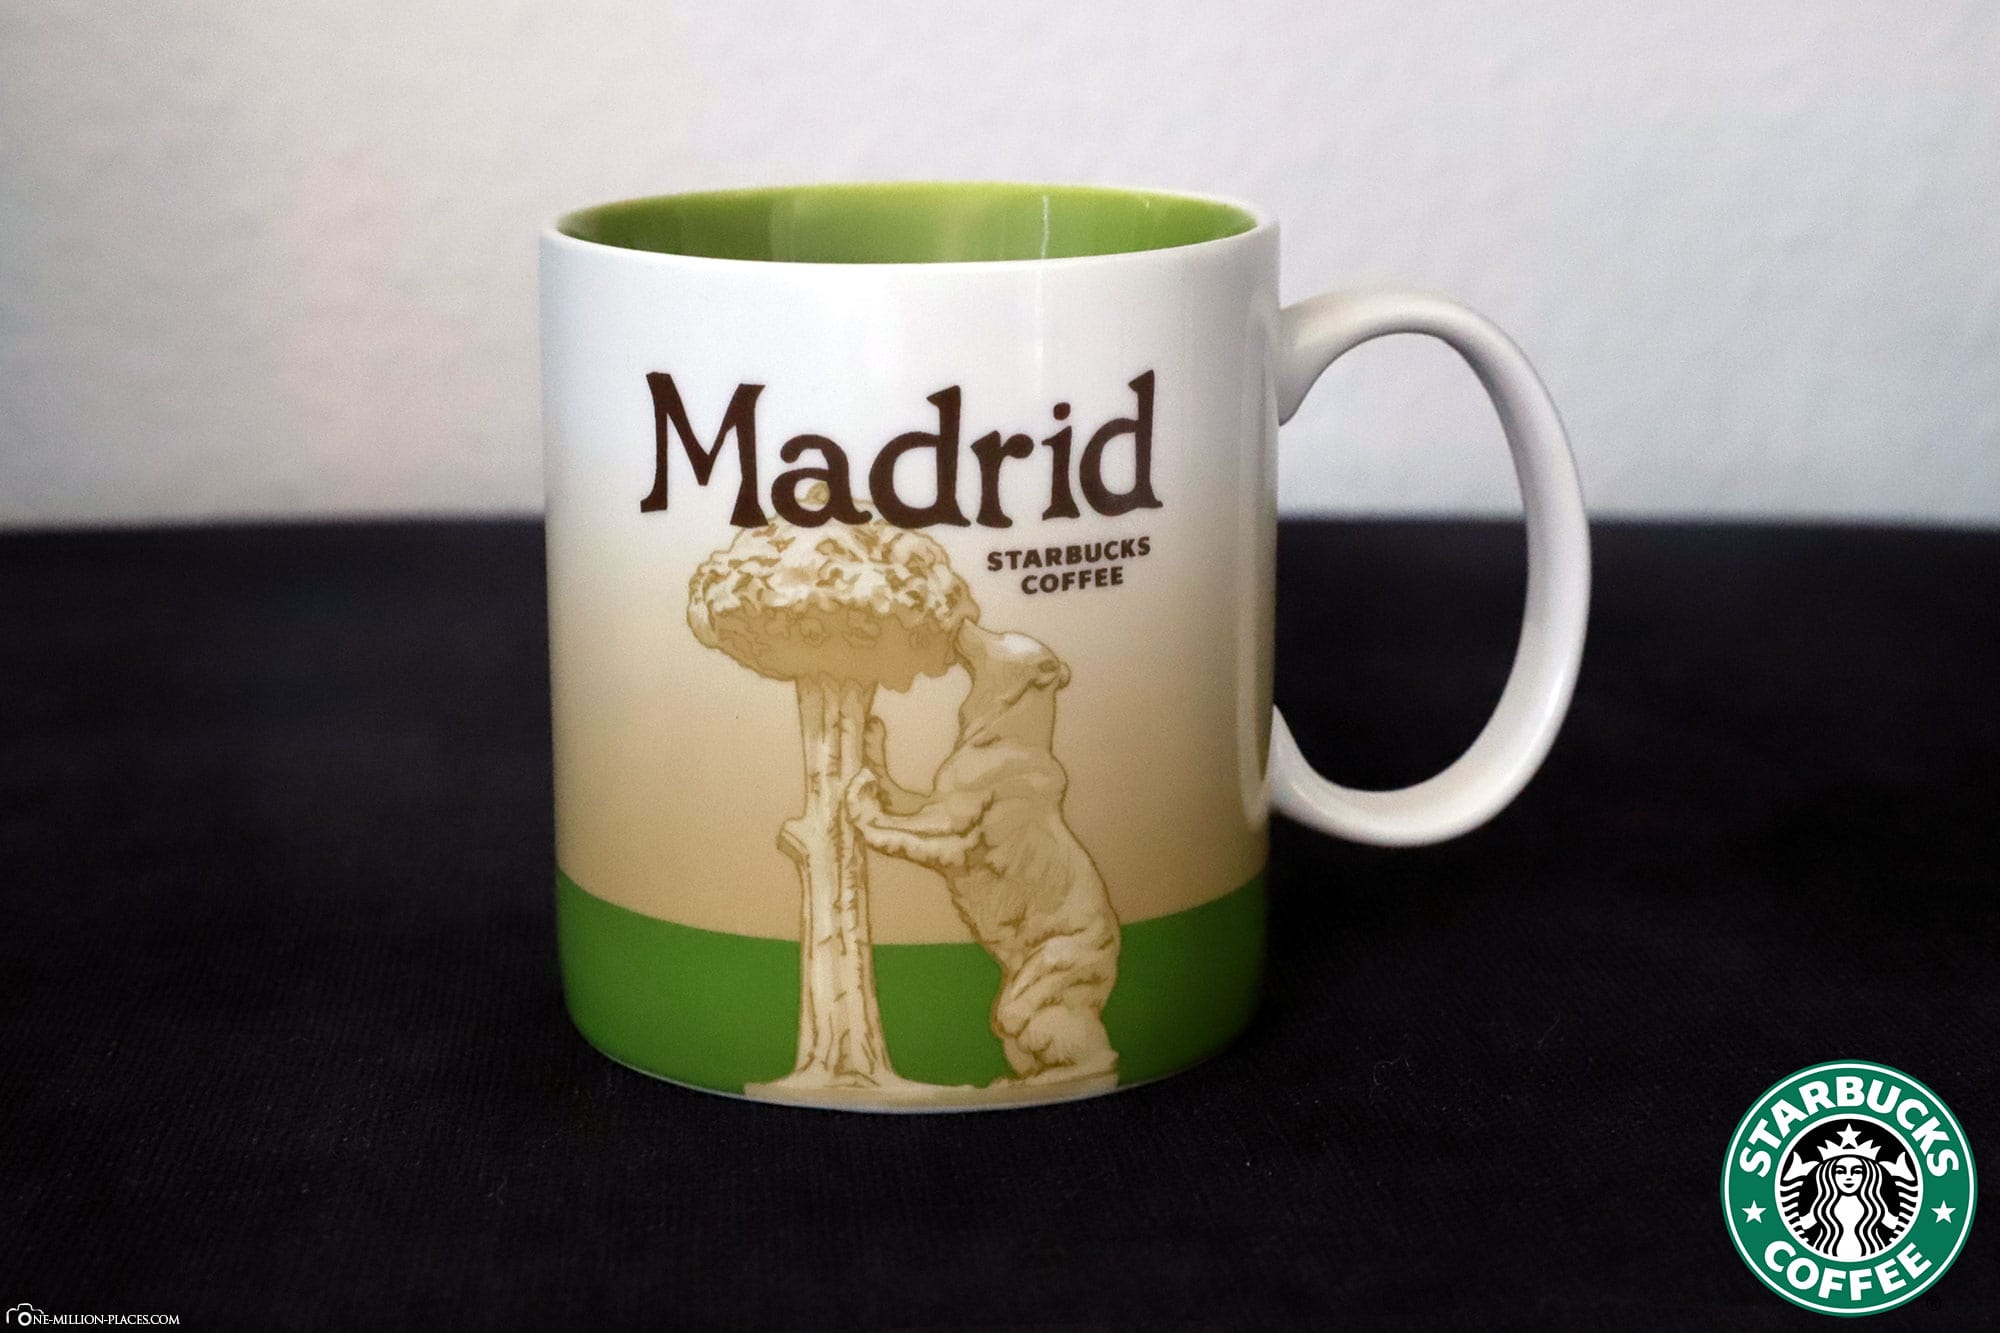 Madrid, Starbucks Cup, Global Icon Series, City Mugs, Collection, Spain, Travelreport